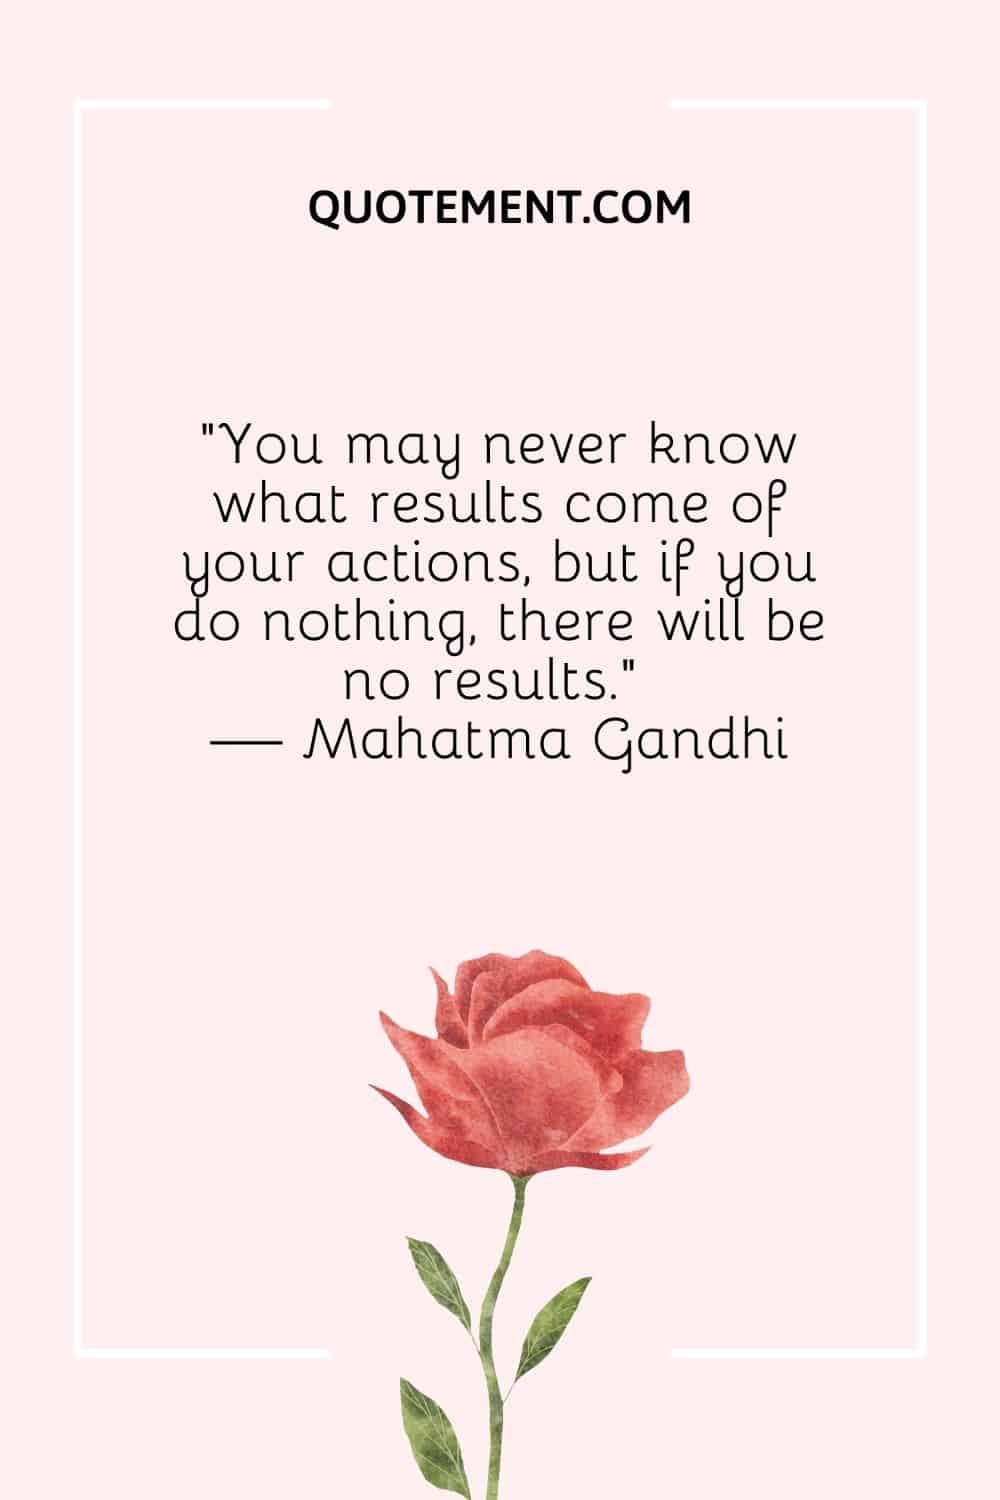 “You may never know what results come of your actions, but if you do nothing, there will be no results.” — Mahatma Gandhi